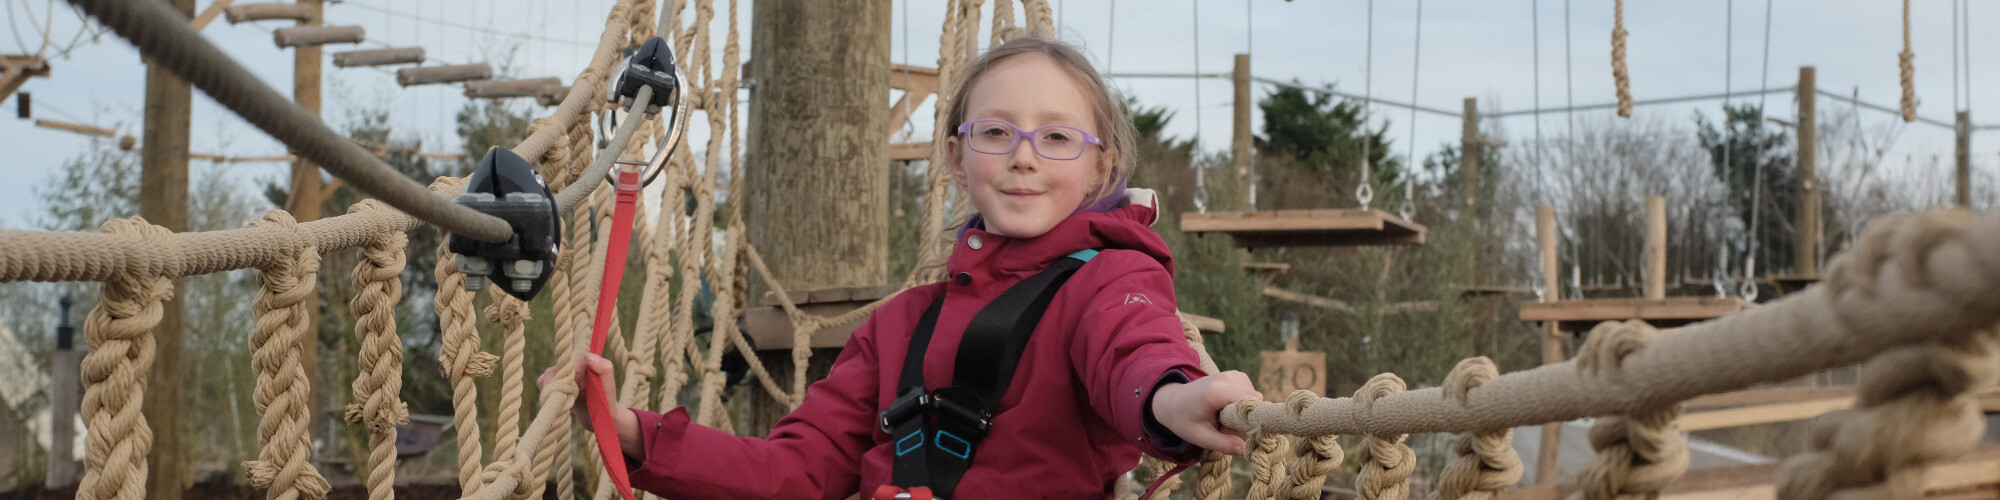 Child on aerial adventure course at The Lost Valley, The Valley Evesham